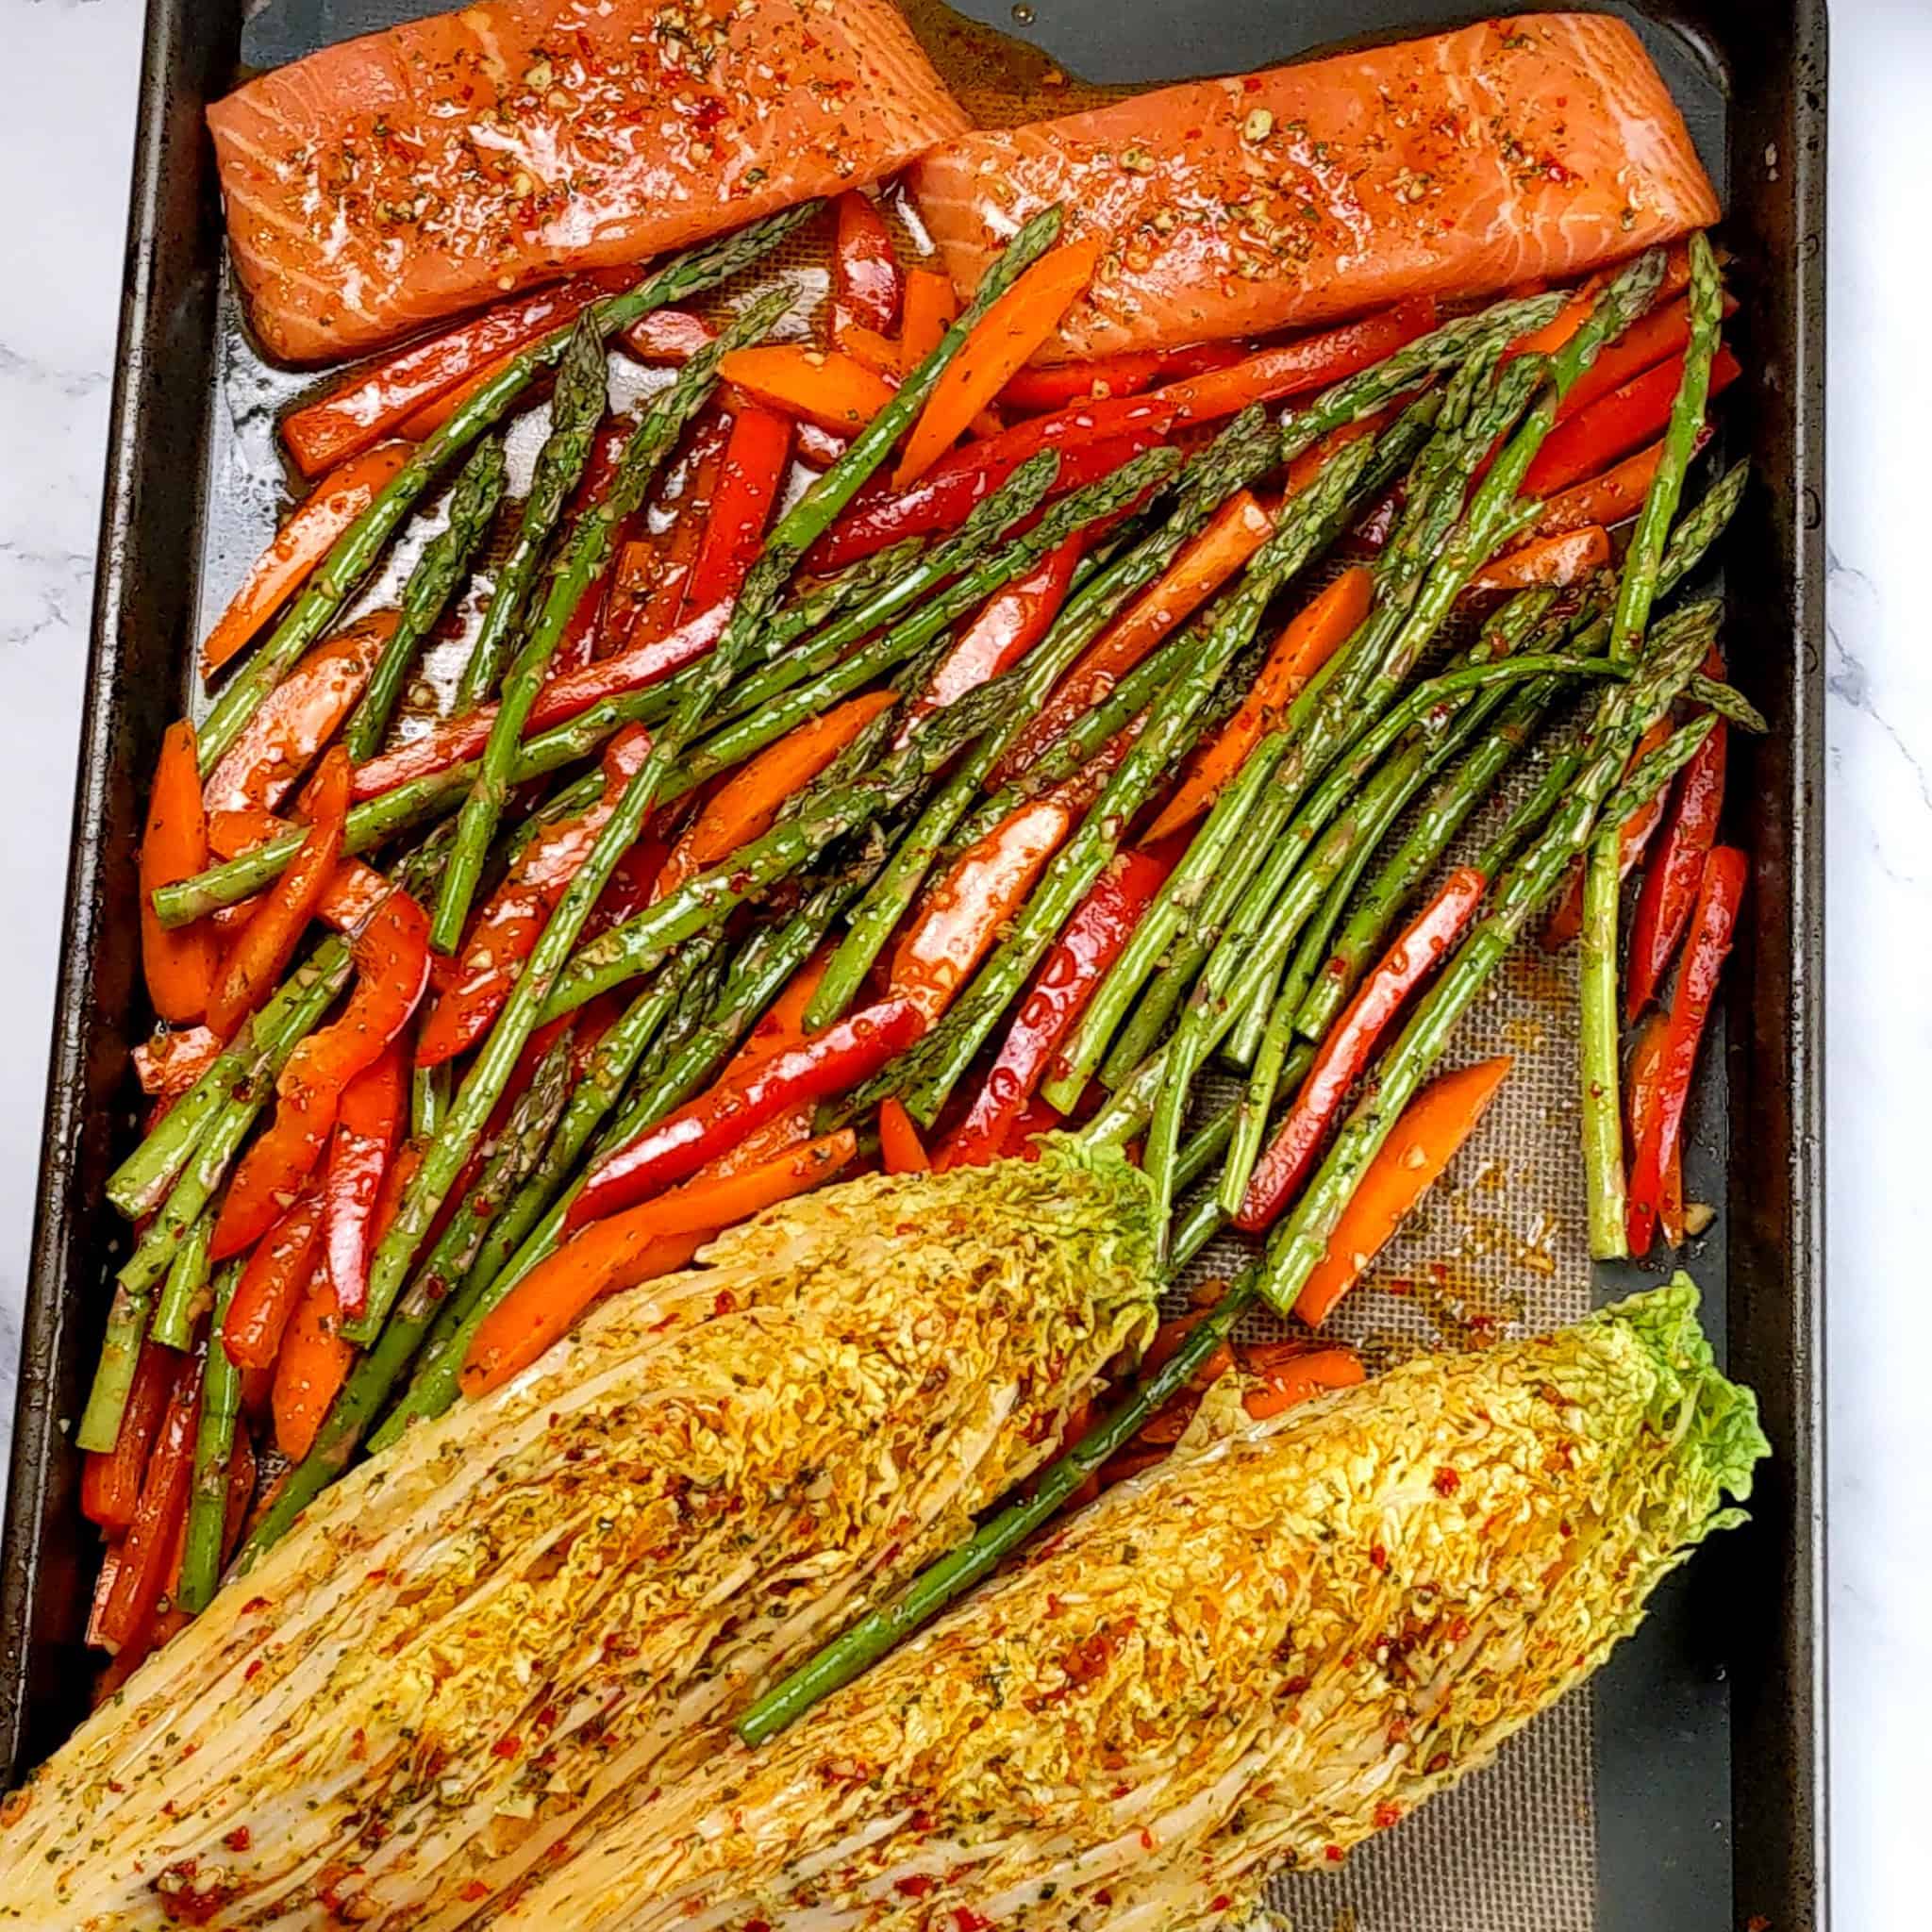 the  chili lime salmon, vegetables and napa cabbage arranged in lines on the silicone lined sheet pan dressed in the wet seasoning.